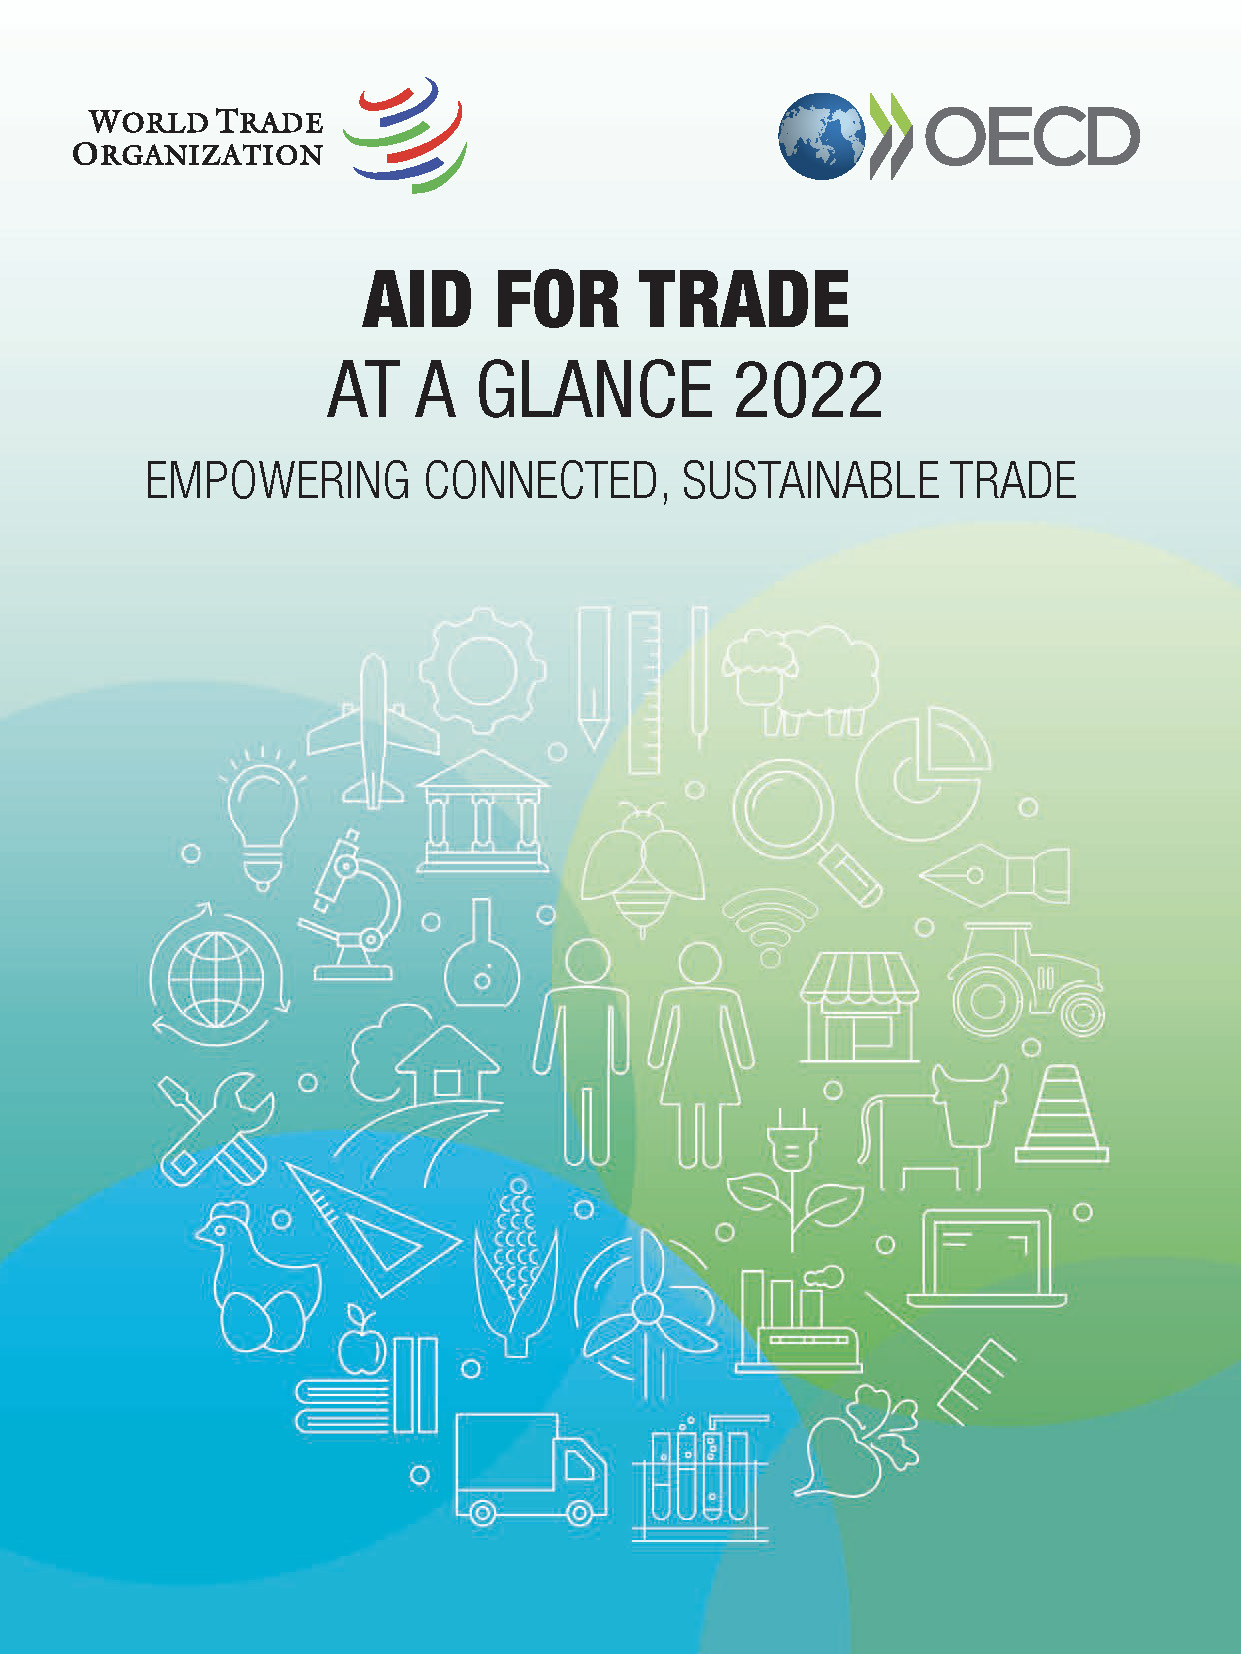 image of Aid for Trade during the COVID-19 crisis and recovery